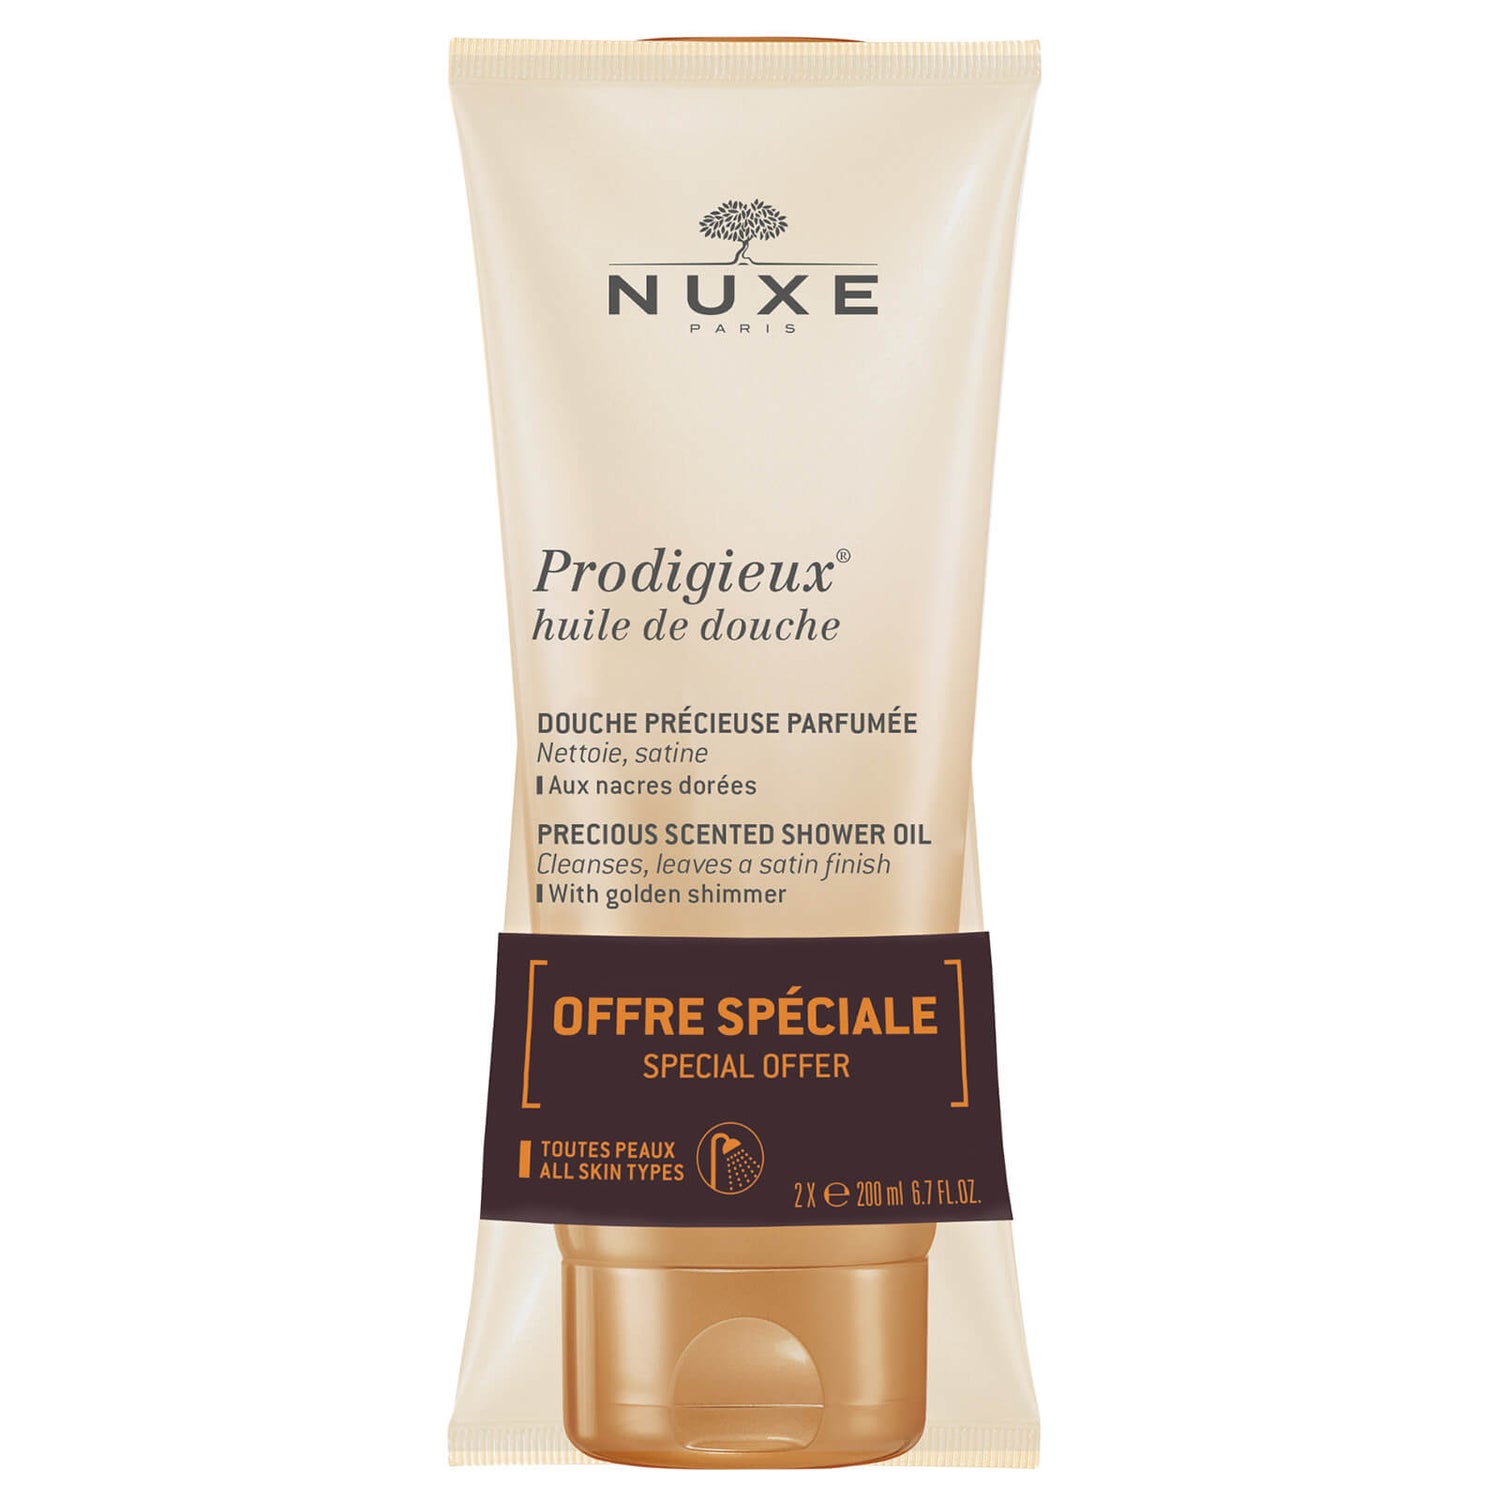 NUXE Prodigieux® Shower Oil Duo 2x200ml (Worth £26.00)